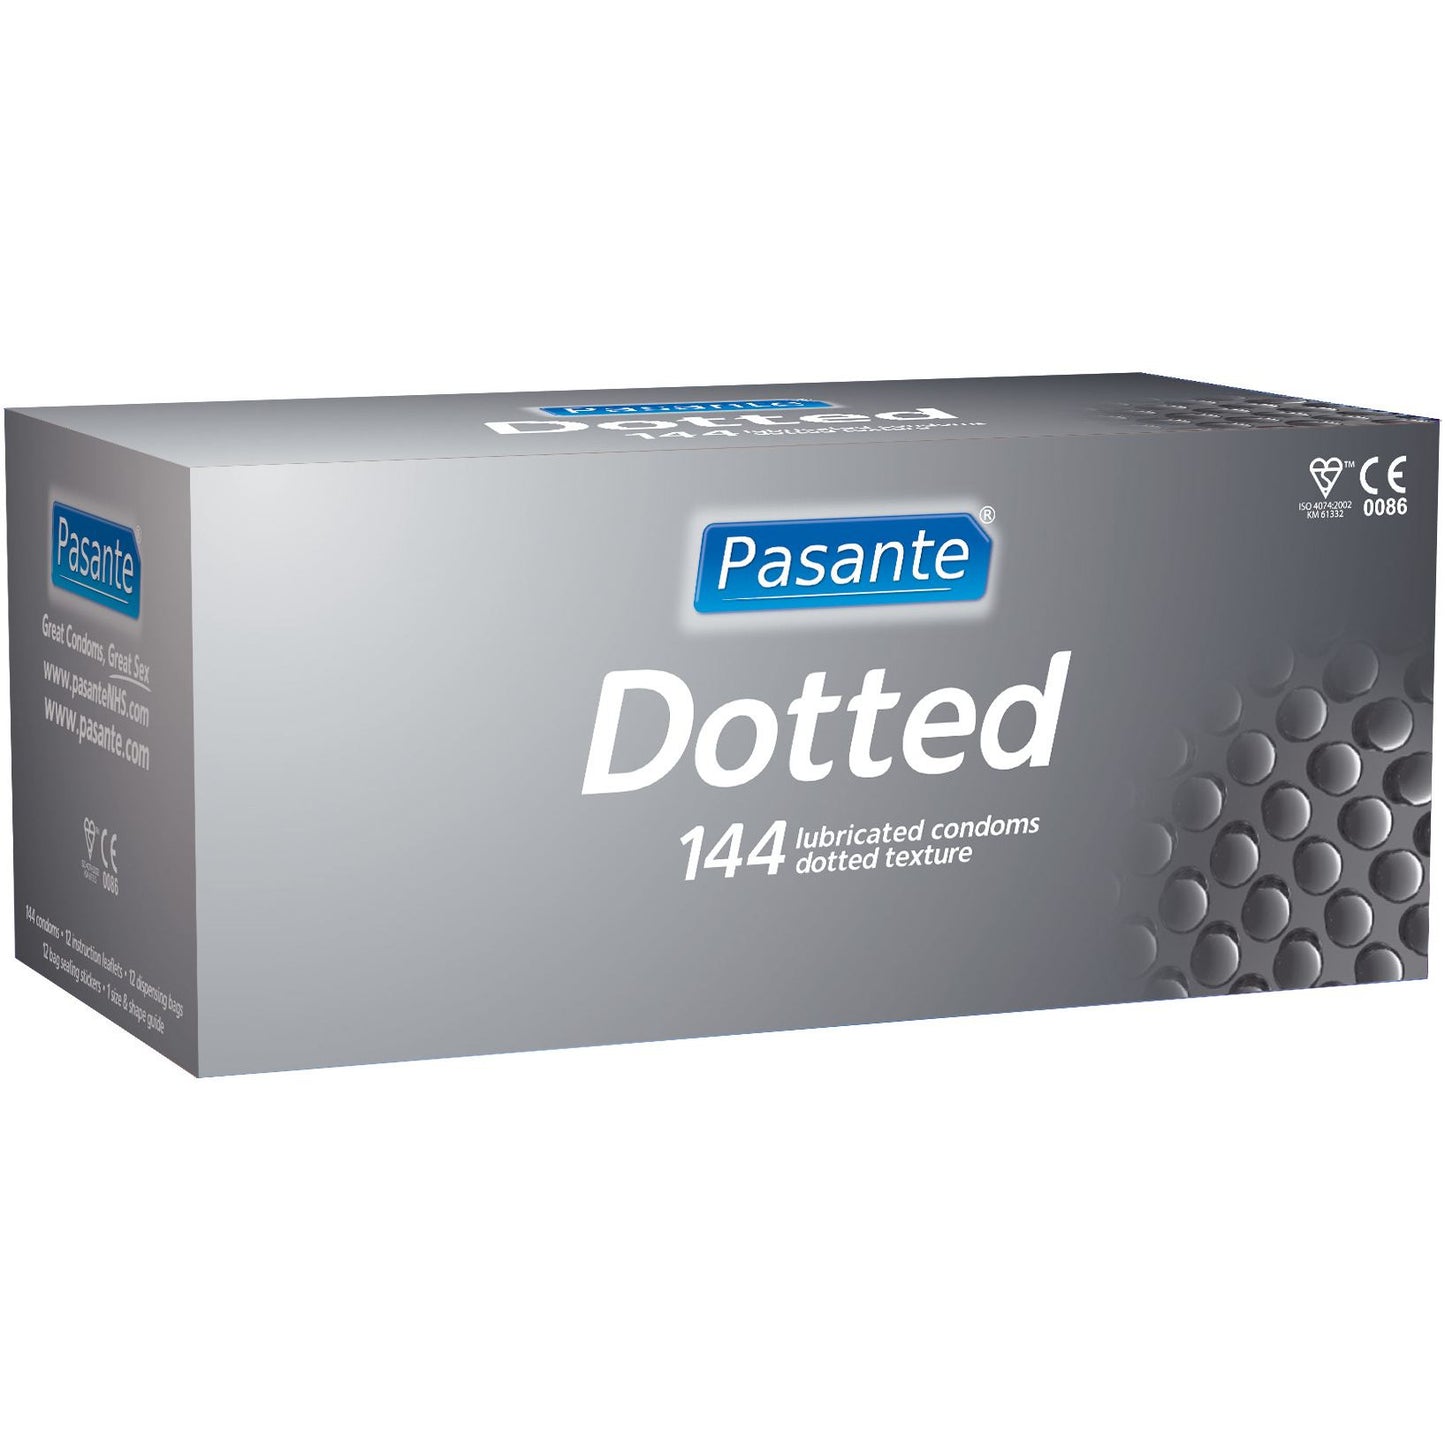 Pasante Dotted Condoms - Clinic Pack x 144